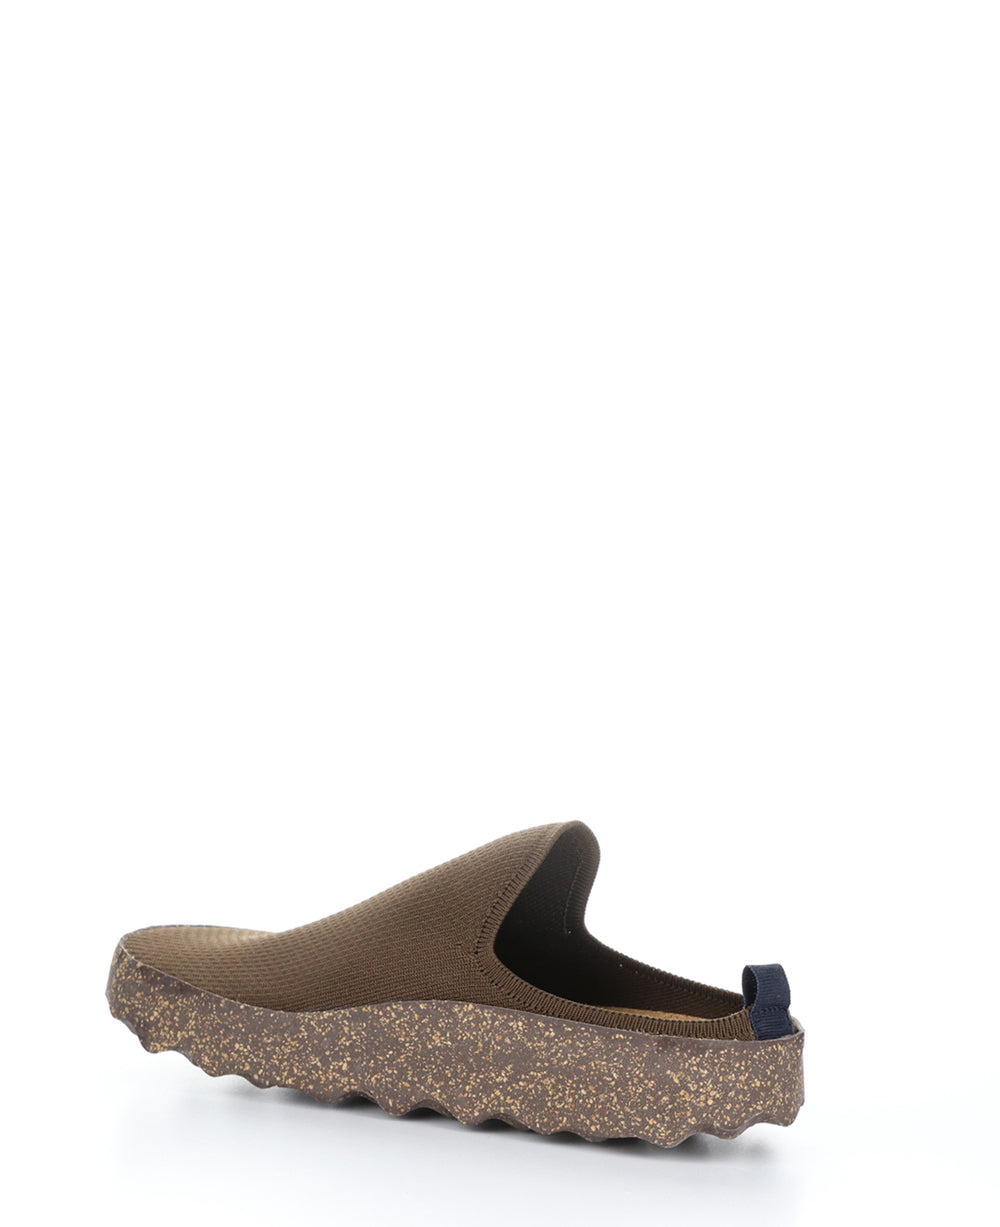 CLOG105ASPM BROWN Slip-on Shoes|CLOG105ASPM Chaussures à Bout Rond in Marron